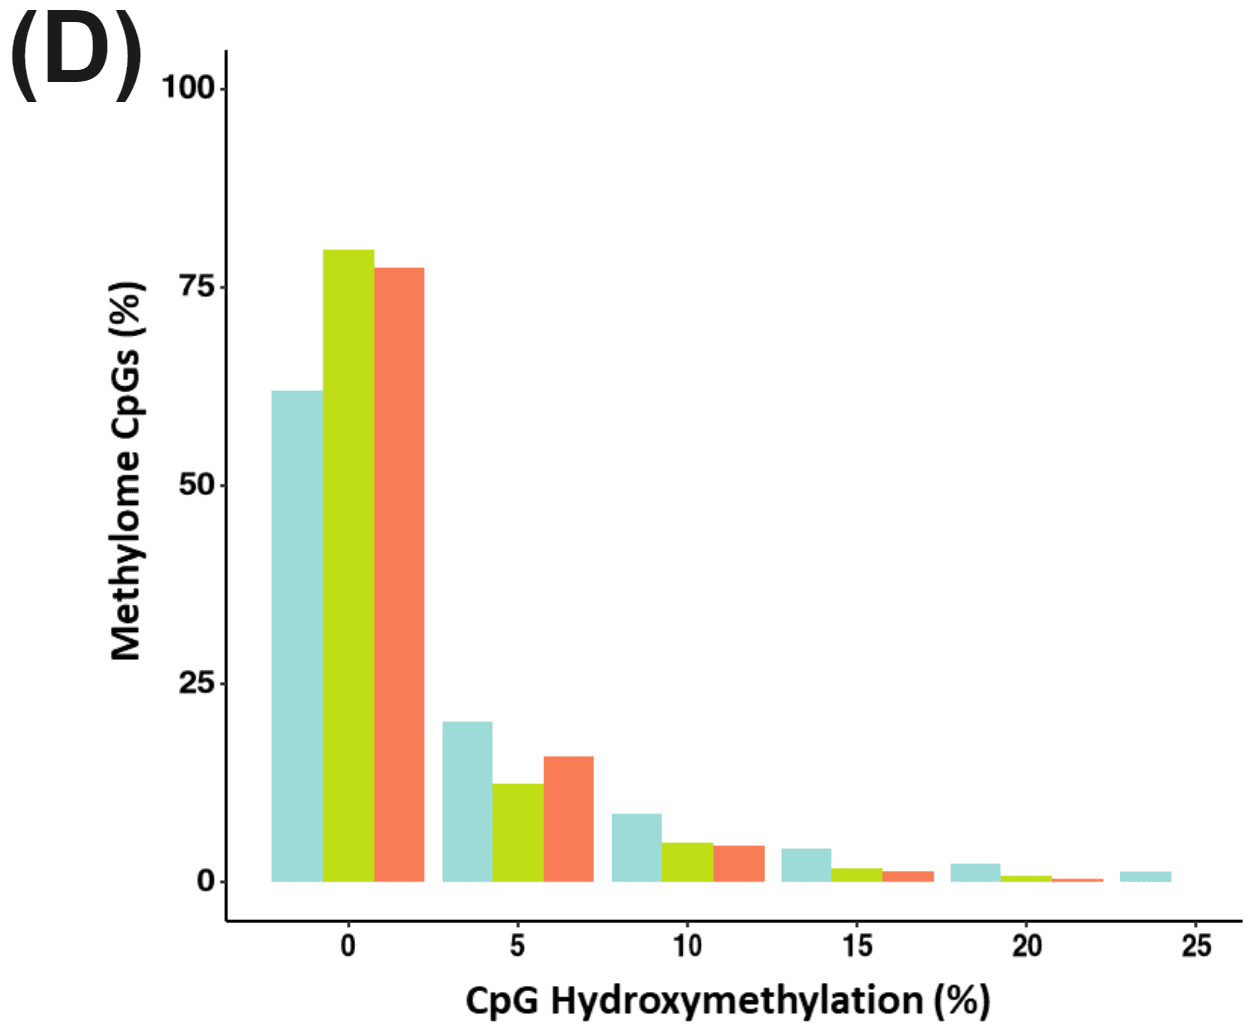 CpG hydroxymethylation at methylome panel CpGs for Healthy and CRC samples using targeted duet evoC